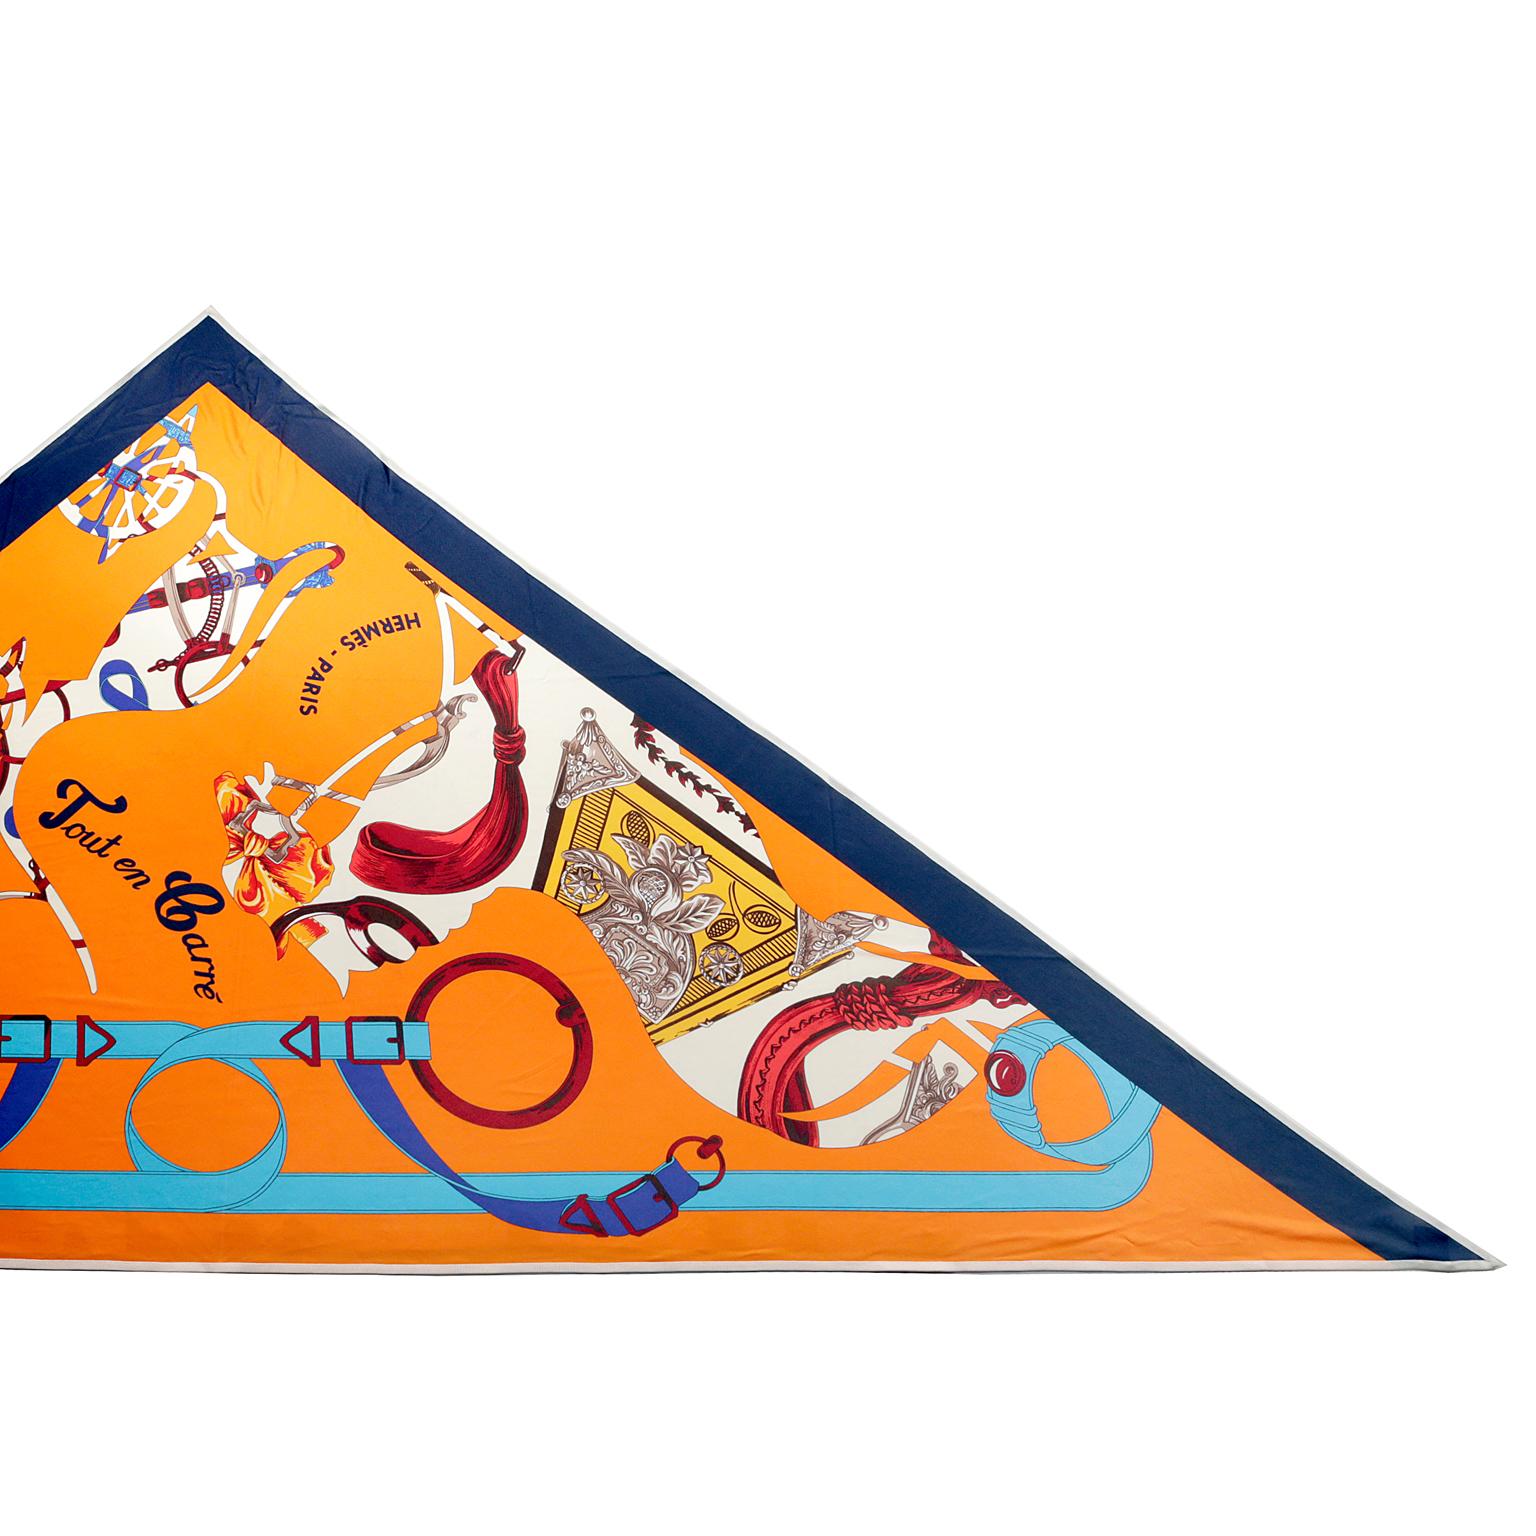 Hermès Tout En Carre Silk Triangle Scarf- pristine condition
Bright orange background with navy blue border and white knit edging.  Equestrian themed designed by Bali Barret and first issued in 2006.   100% silk.  Made in France.
Measurements: 43” x